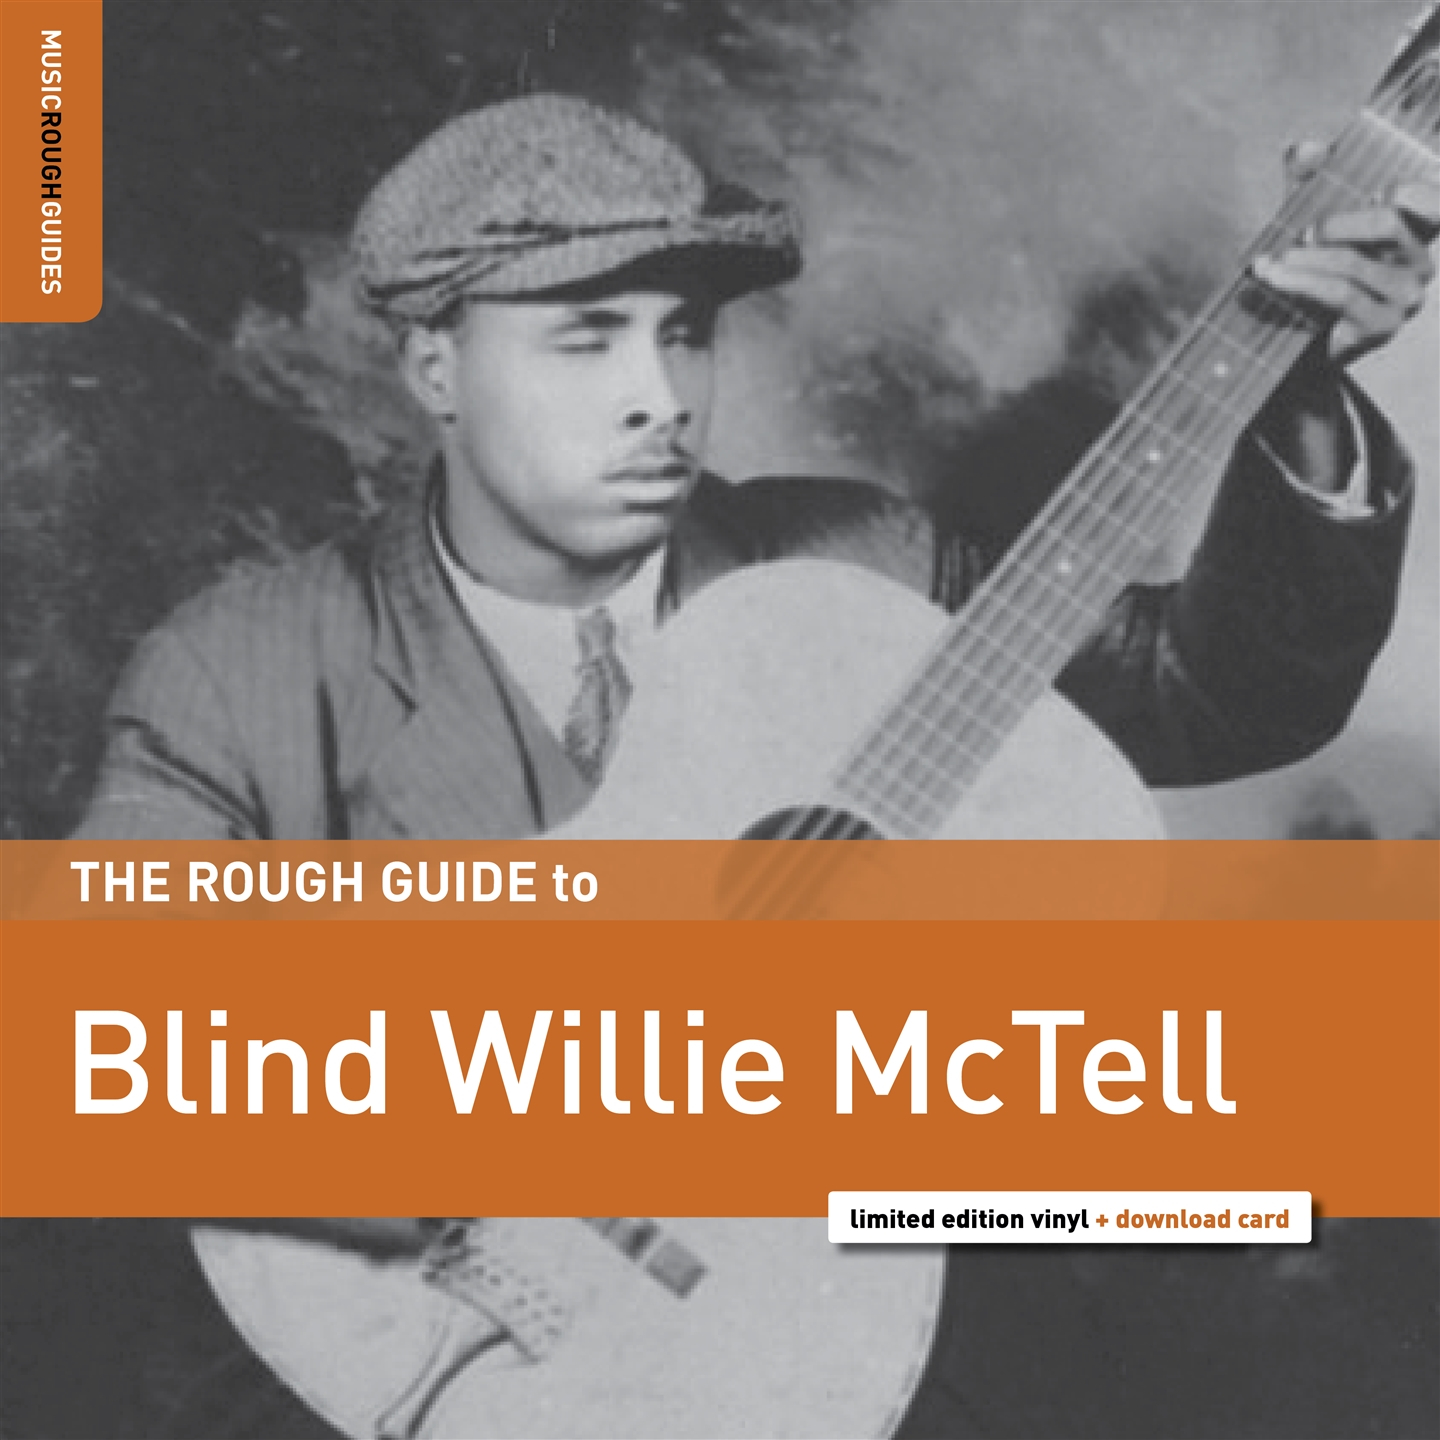 THE ROUGH GUIDE TO BLIND WILLIE MCTELL [LP]